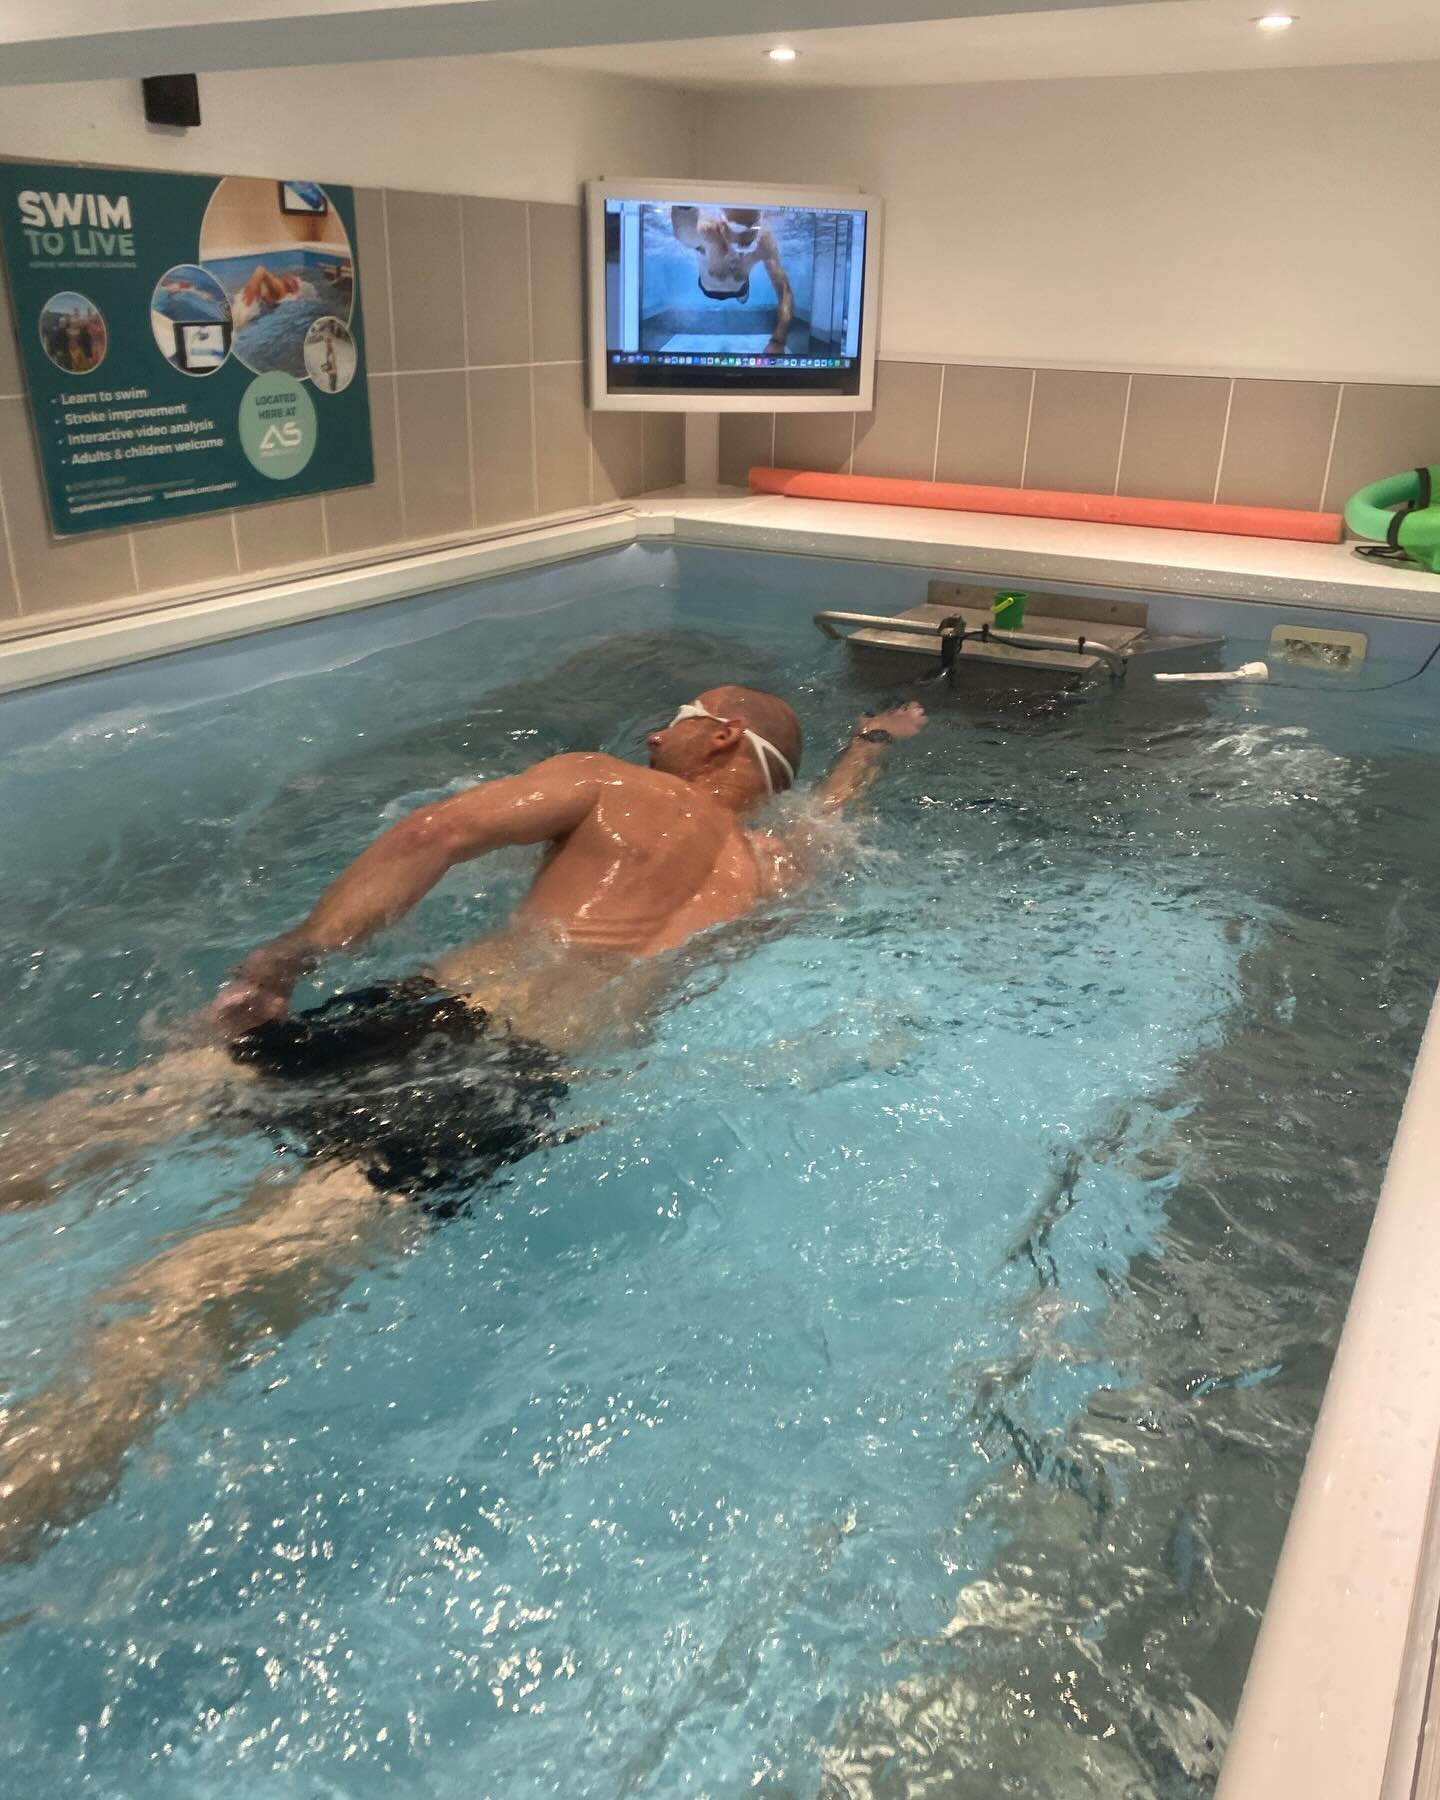 On the road to @blenheimpalacetriathlon need a tune up before your big day ? The first one of the season can be daunting particularly in the cold water swim. Pop in to learn how to control your breathing better. 

There&rsquo;s plenty of time to book